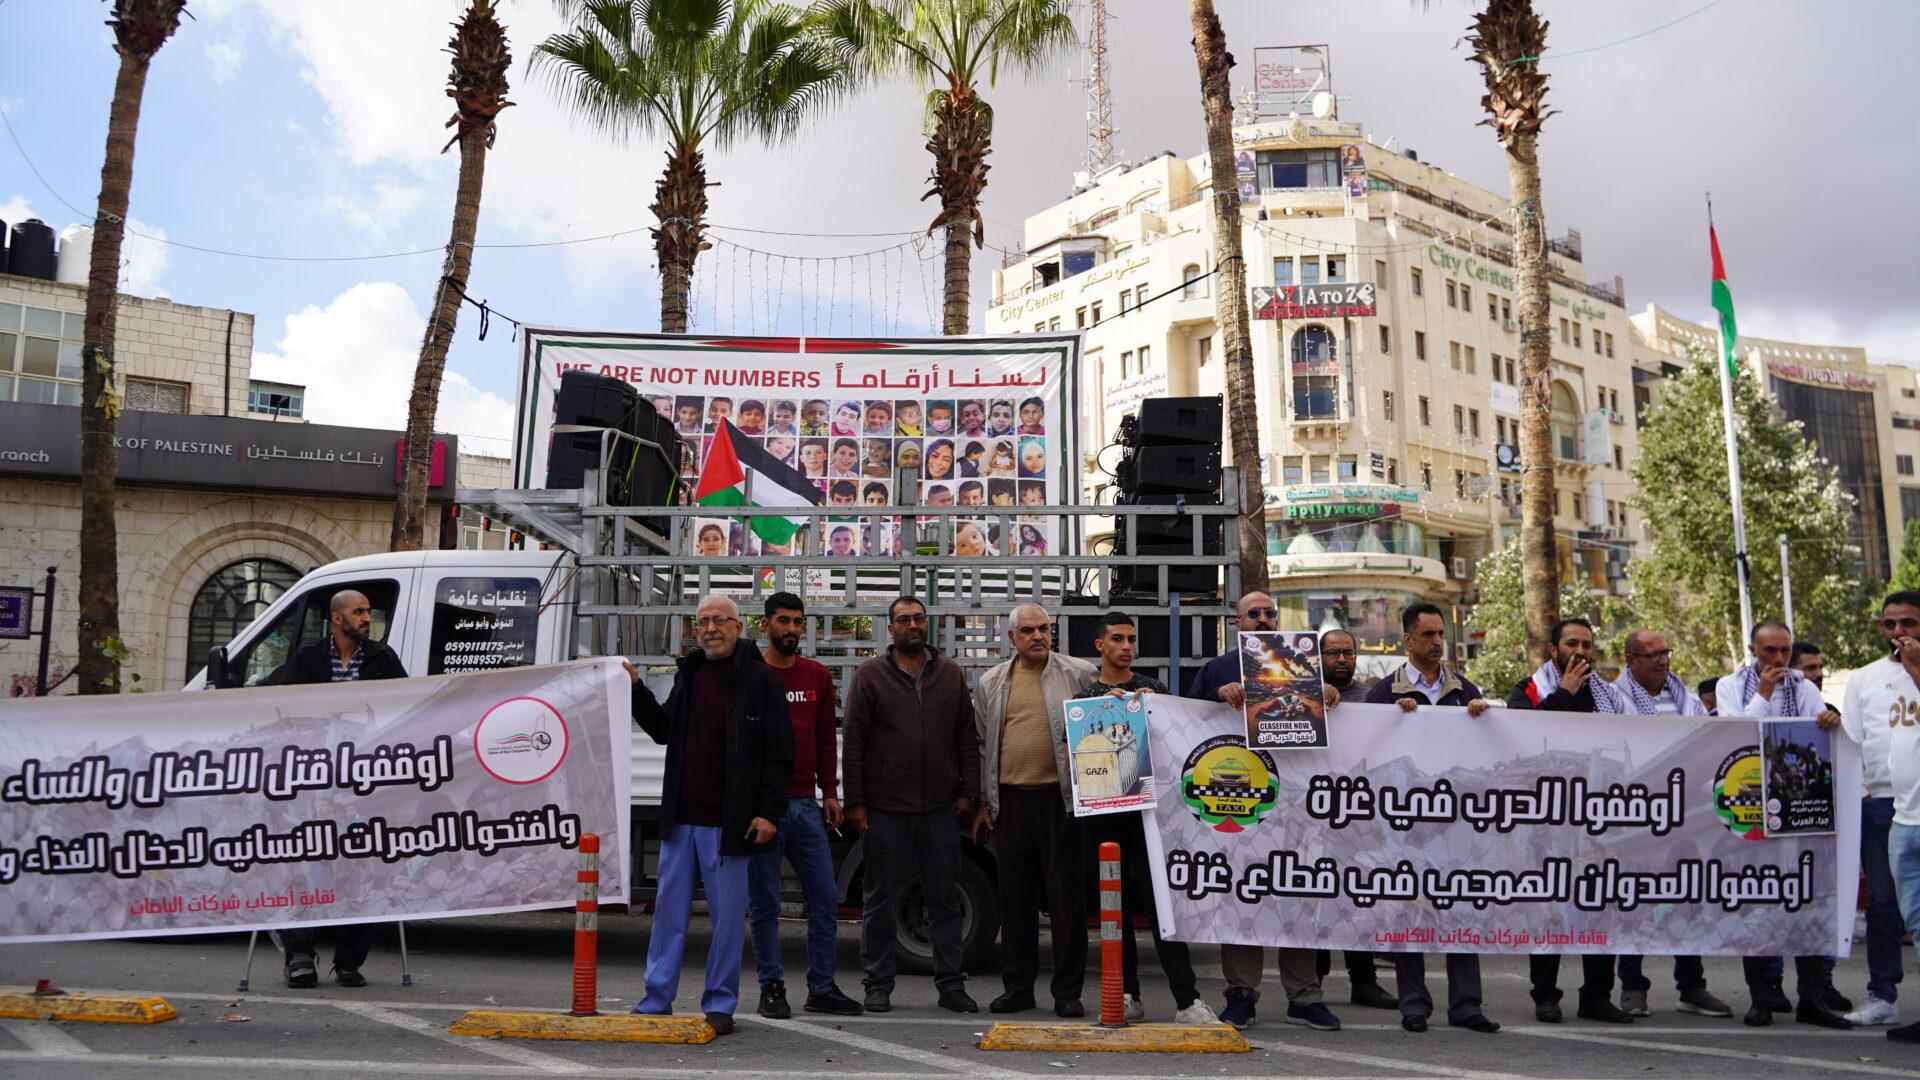 On Nov. 15, Palestinians rallied in downtown Ramallah against the ongoing Israeli war in the Gaza Strip.